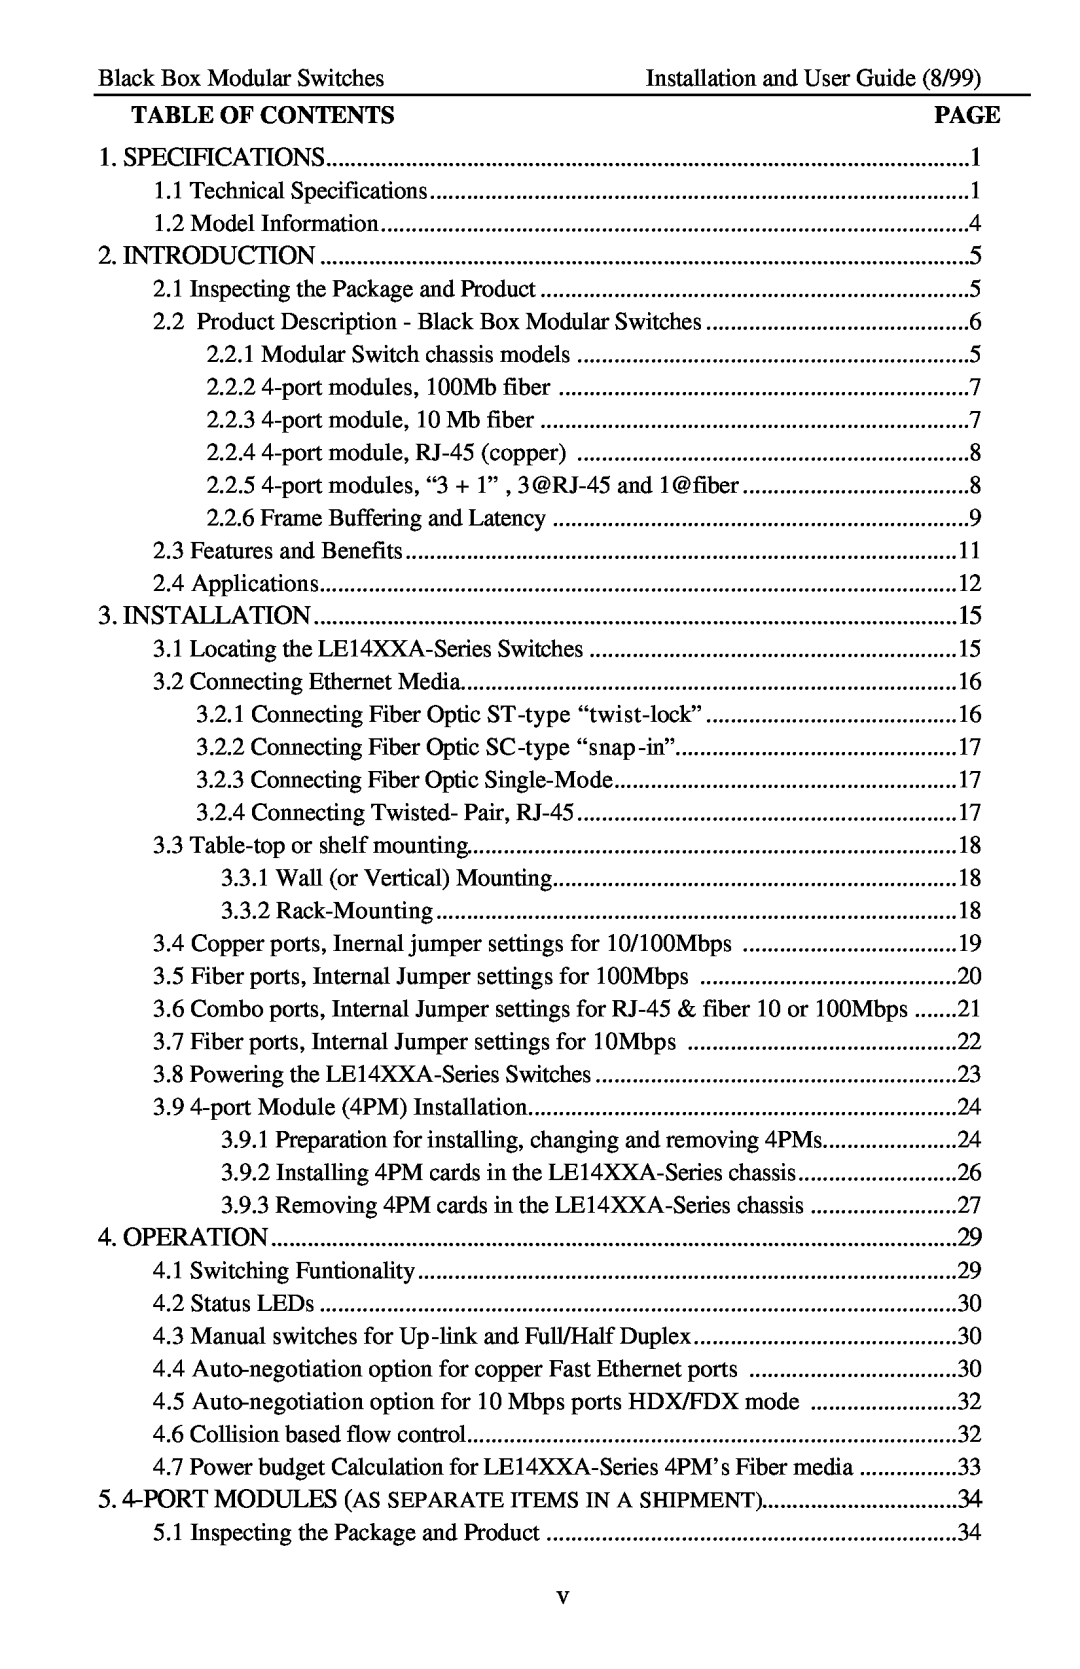 Black Box LE14XXA, Modular Switches manual Table Of Contents, Page 